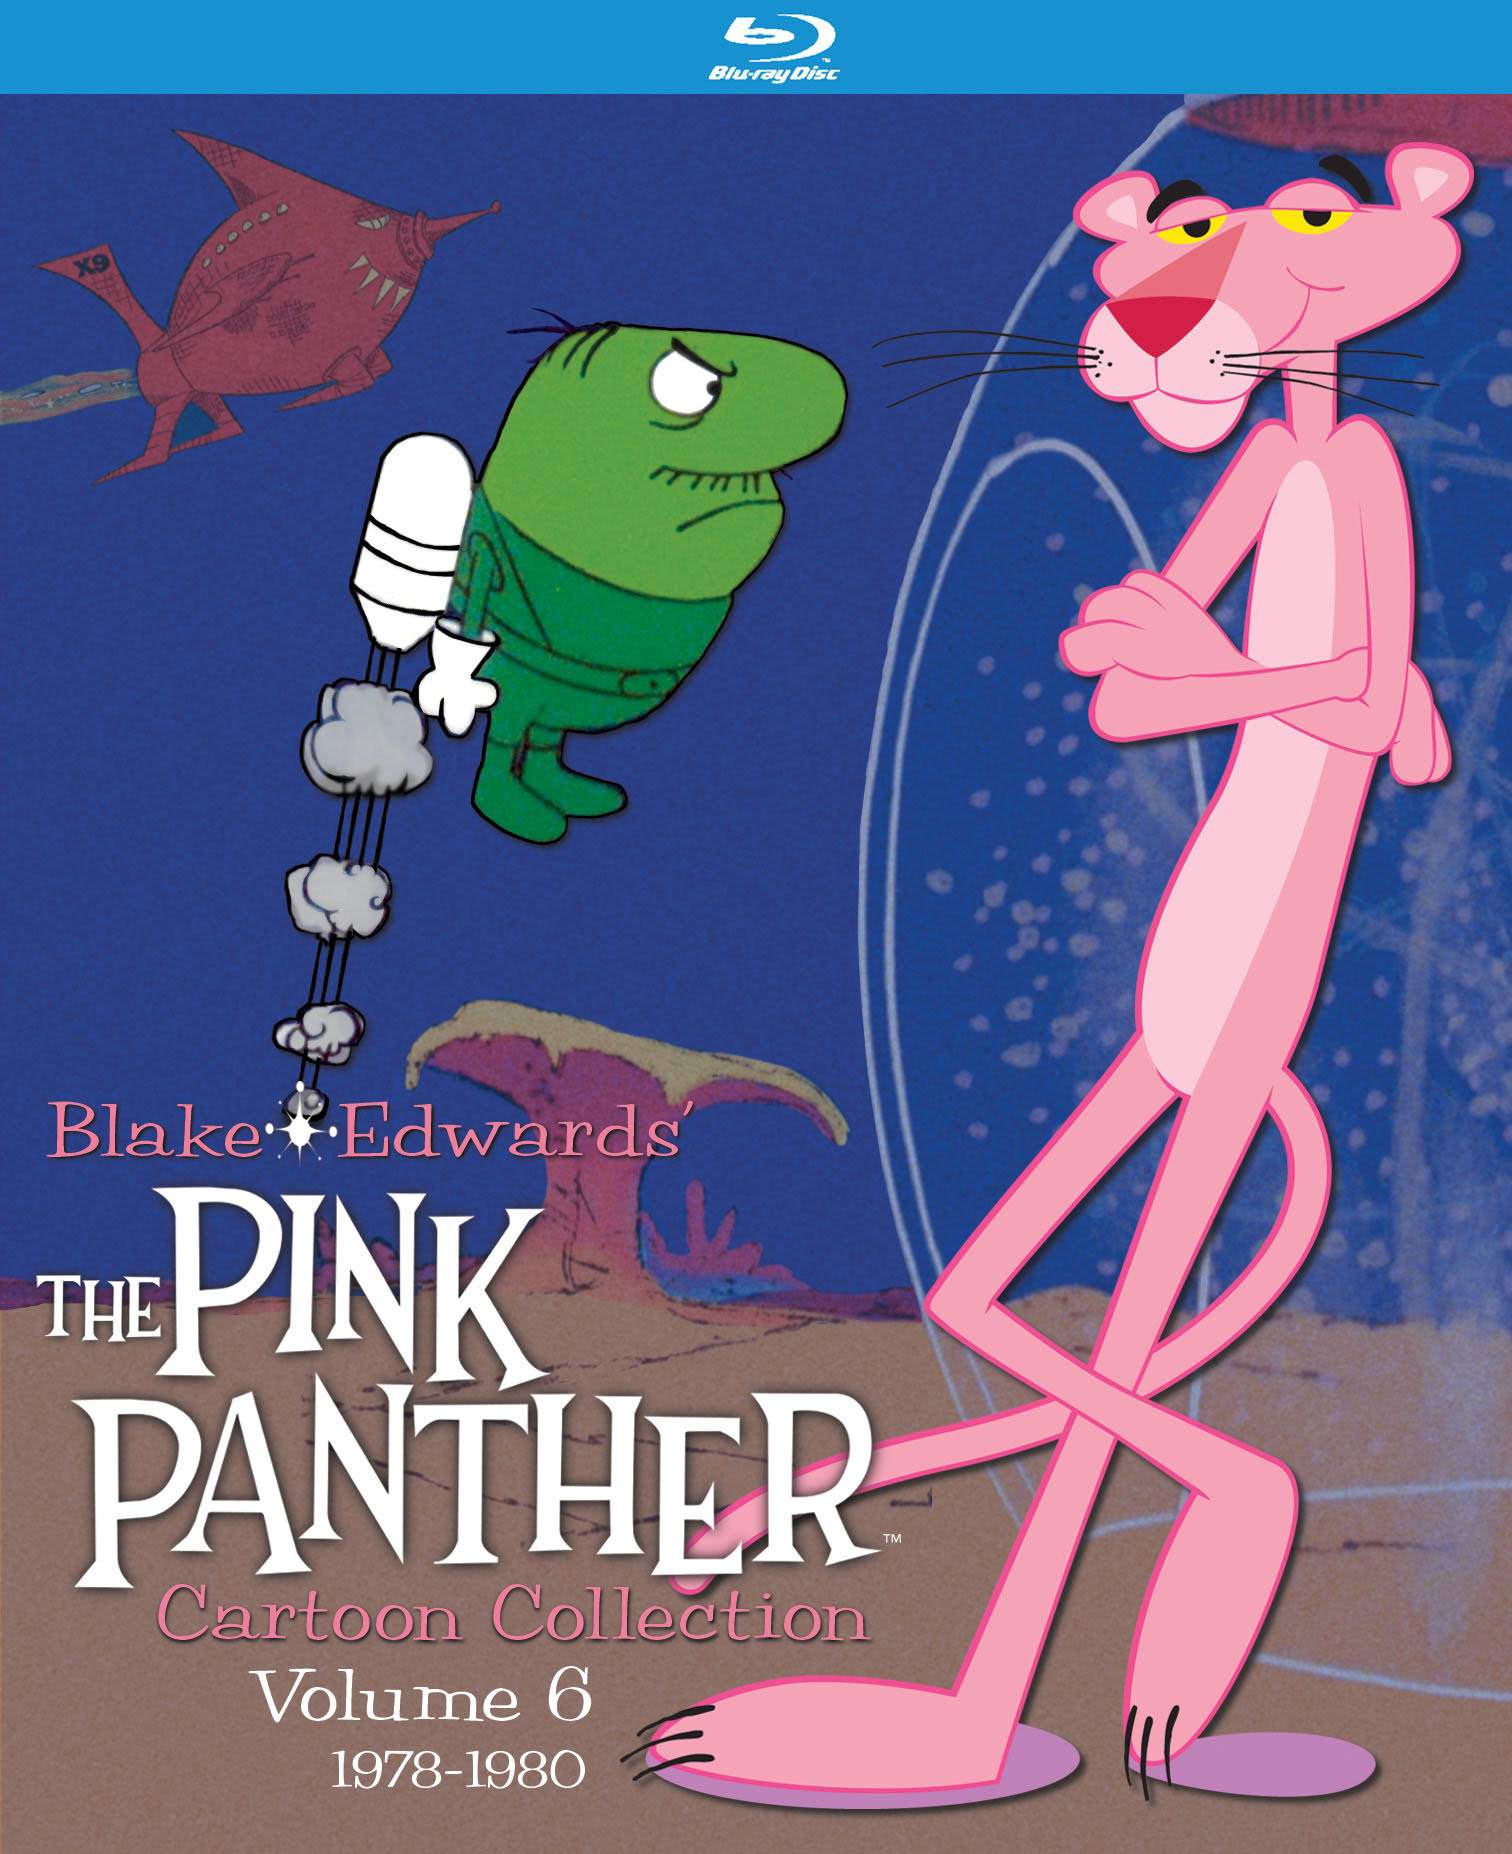 The Pink Panther Cartoon Collection: Volume 6 [Blu-ray] - Best Buy